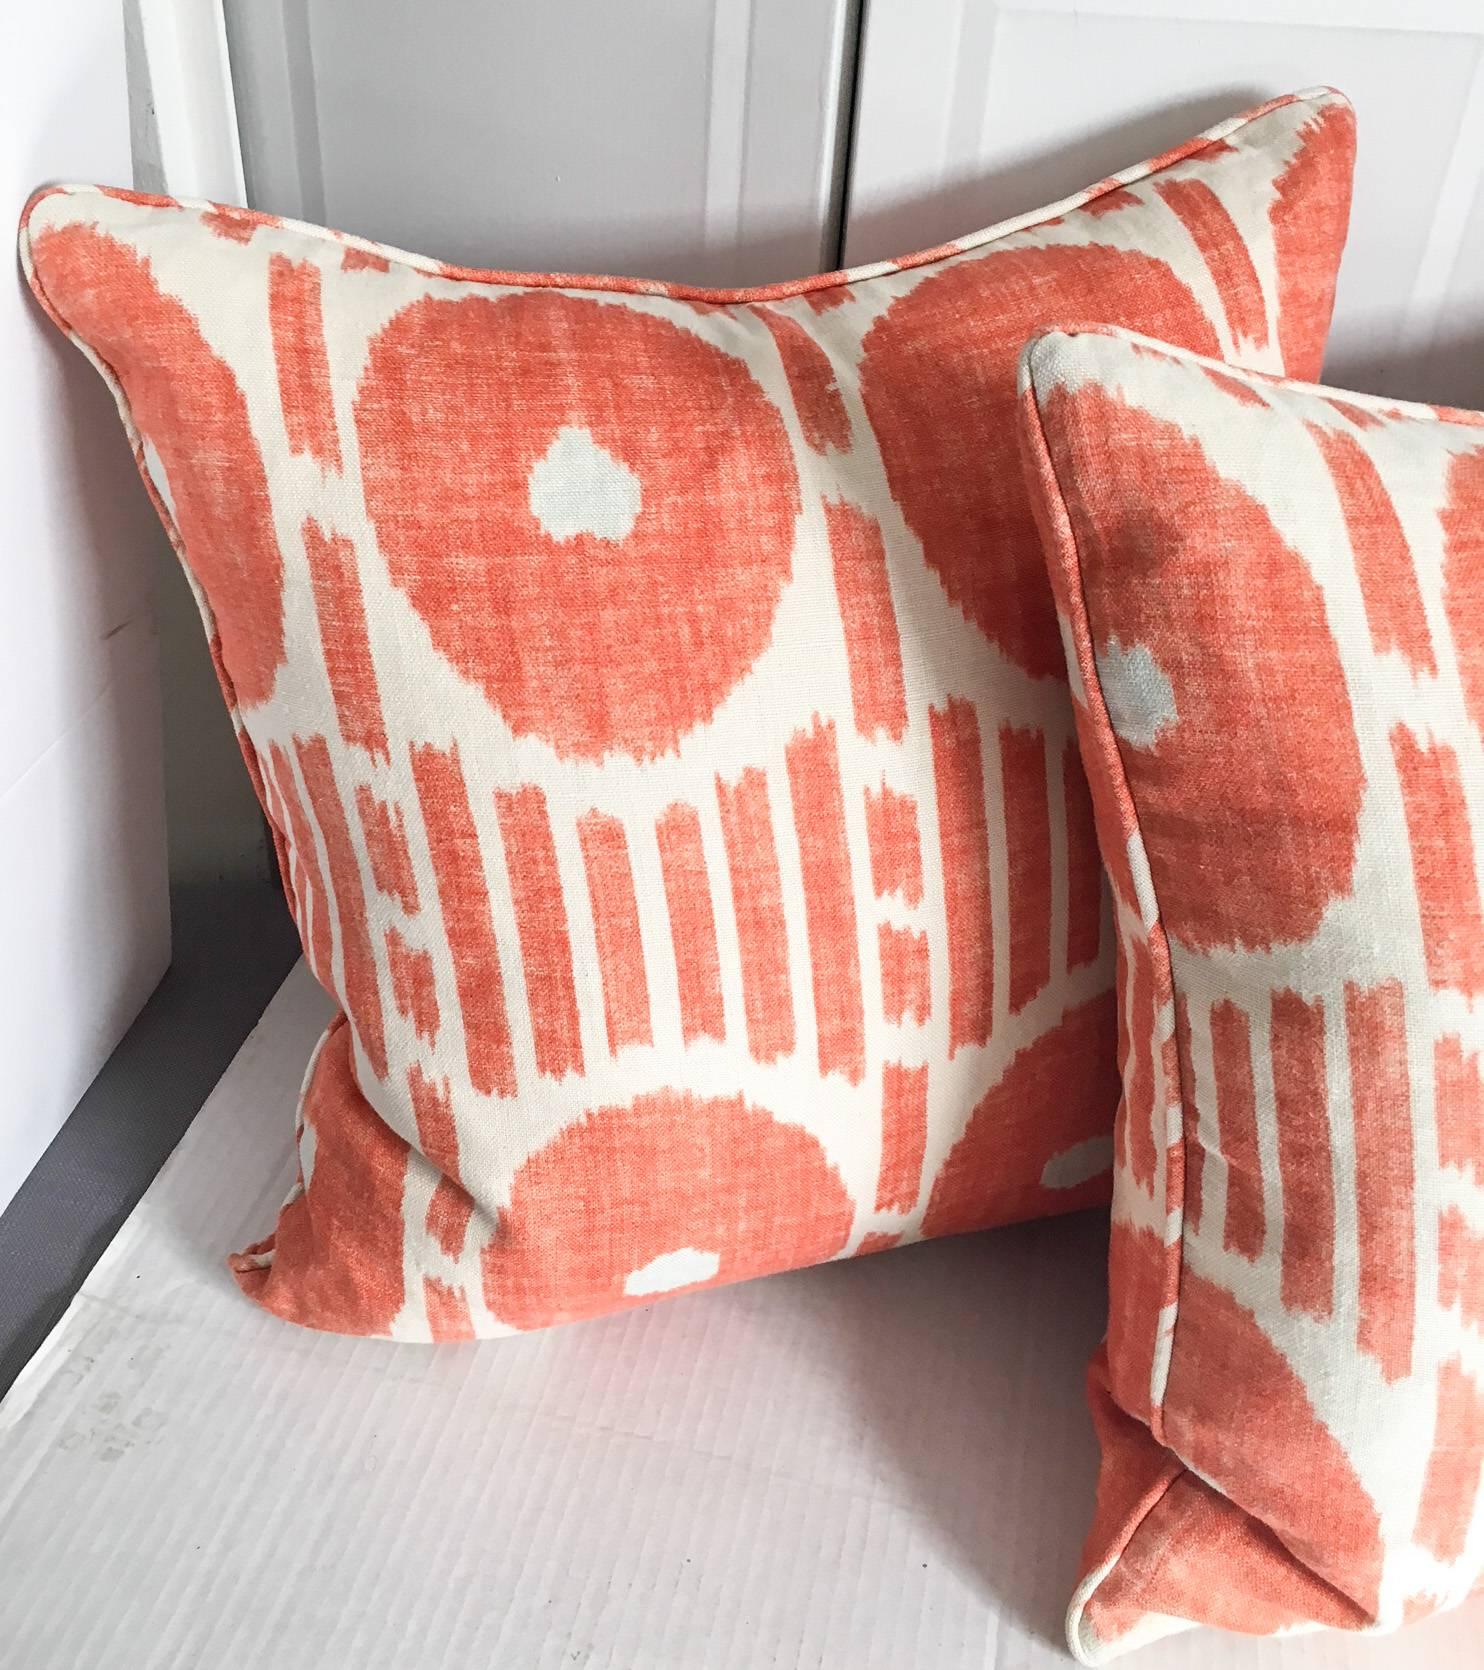 Striking pair of 100% linen cream and orange pillows in Mesa Ikat by Thibaut. Down inserts are included. Each, 20 x 20. Zipper closure.